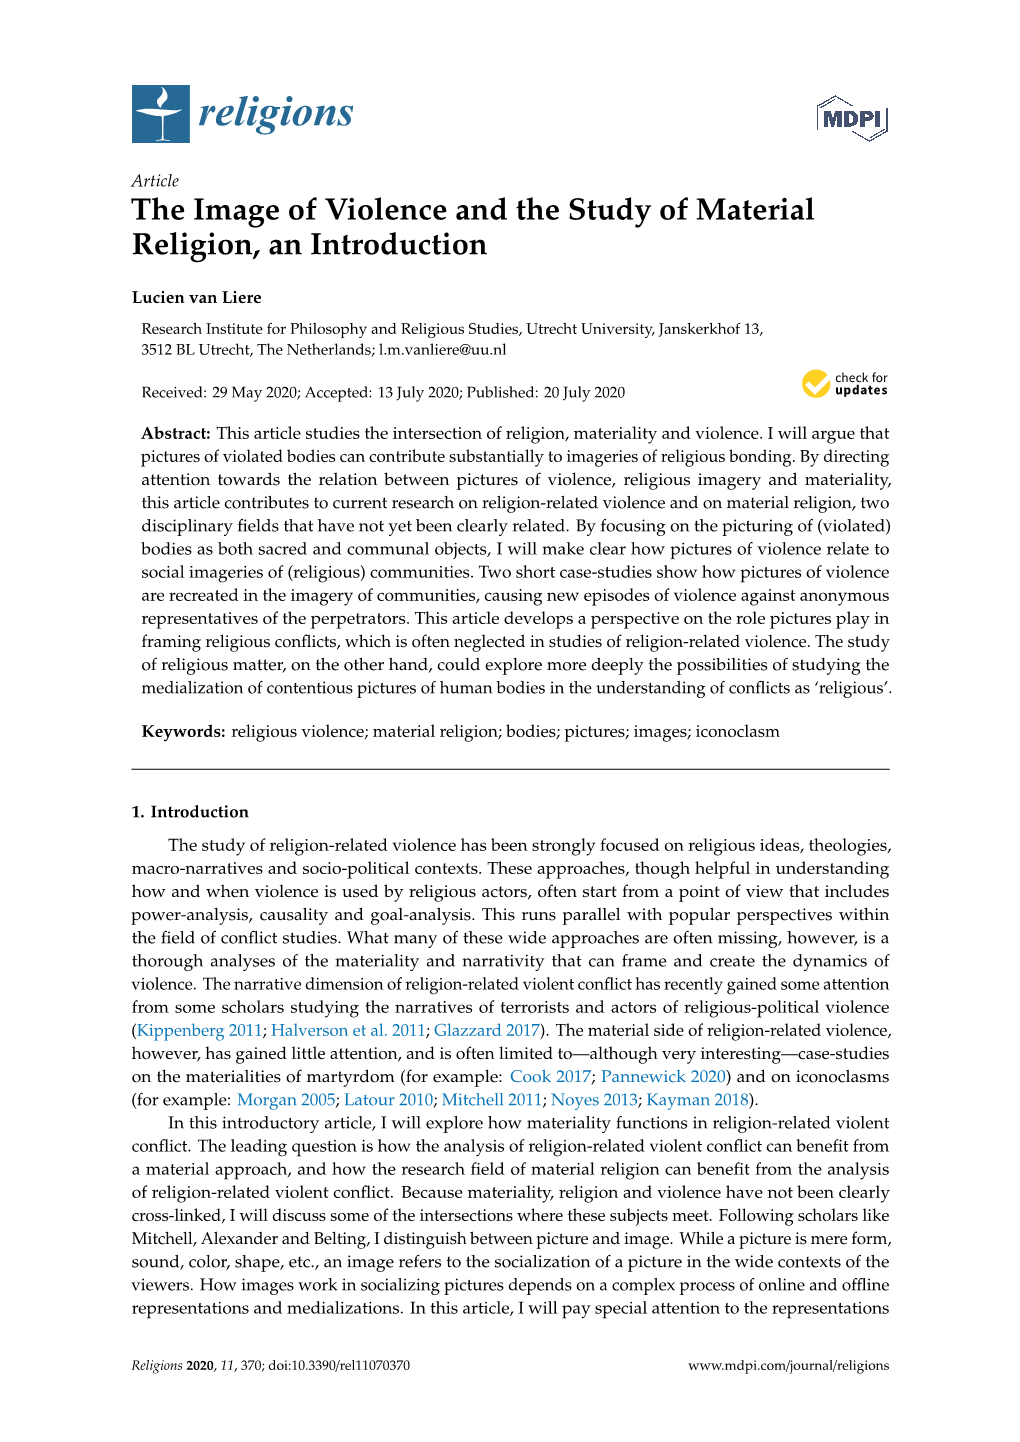 The Image of Violence and the Study of Material Religion, an Introduction